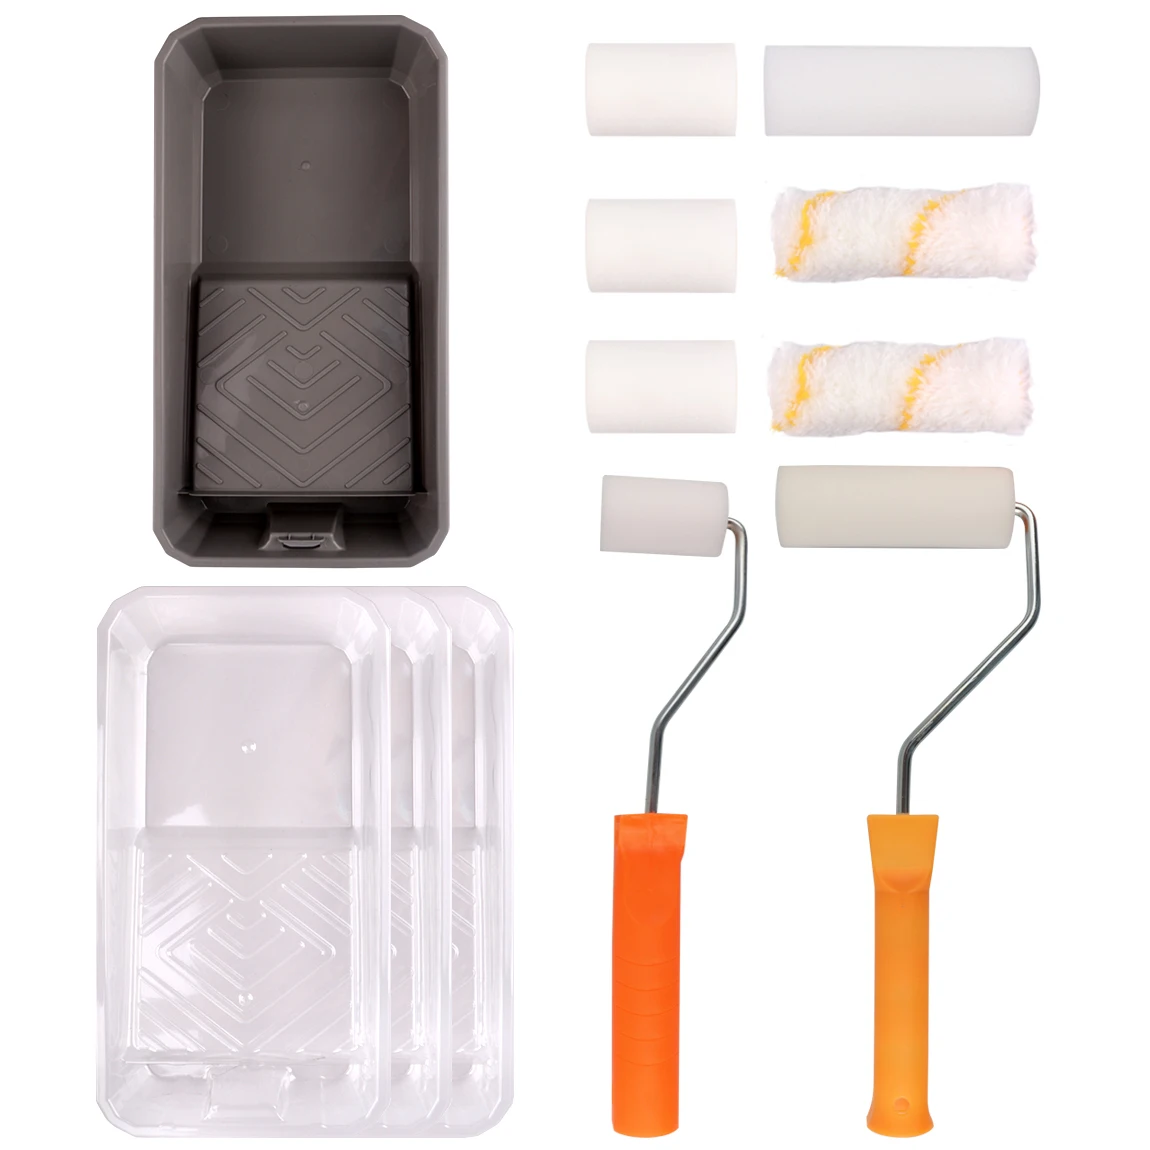 14pcs Paint Roller Set, 4 inch 2 inch Paint Roller Brush Kit with Trays,Roller Frame,Home Painting Supplies for Wall,Cabinet 5pcs eva roller rush painting sponge brush paint set kit